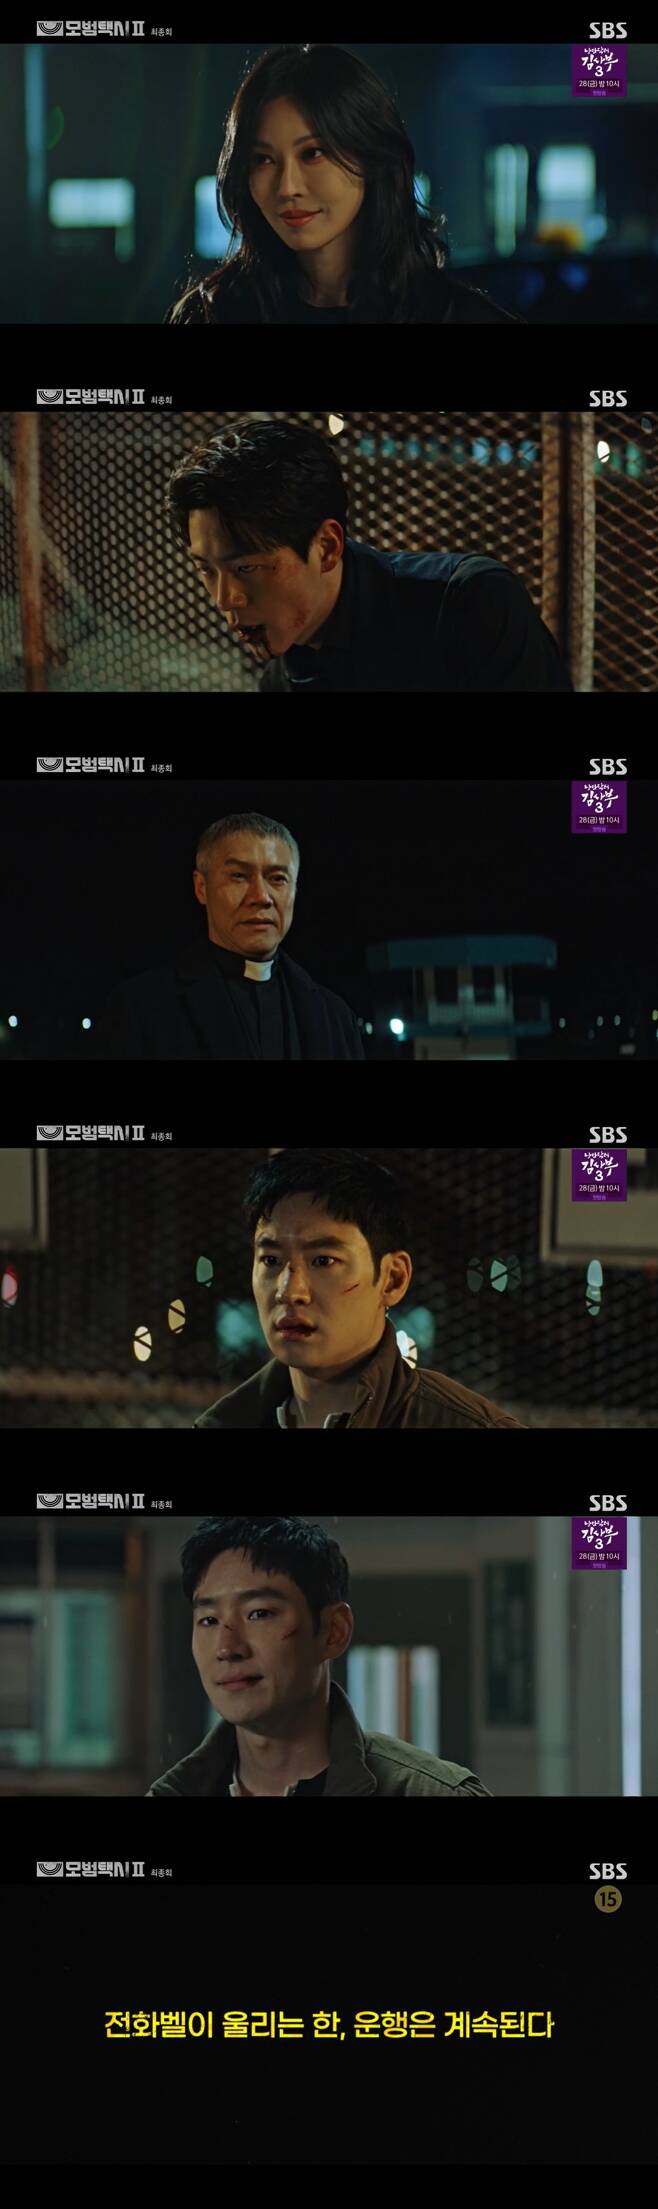 Seoul =) = Taxi Driver 2 Shin Jae-ha handled Park Ho-san.In the SBS Friday-Saturday drama Taxi Driver 2 (playwright Oh Sang-ho/director Ethan, Jang Young-seok), Kim do-gi (played by Lee Je-hoon) was pictured continuing to run the Taxi Driver after completing his work at the Golden Globes.Kim do-gi and Jang Seong-choel (played by Kim Eui-seong) passed out and were loaded into a car and moved somewhere. The Rainbow Luck employees who were watching followed the vehicle. An gold society chased them and surrounded them.The gold society pointed a gun at The Rainbow Luck employees.The Rainbow Luck employees, including kim do-gi, were caught in the gold society and were in danger of being killed. At that time, Taxi entered the warehouse where they were trapped and destroyed the gold society.The female sniper (Kim So-yeon) said, Are you afraid of hurting anyone these days?Jang Seong-choel introduced Taxi Drivers No. 1 article.On Ha-jun (played by Shin Jae-ha) opened the envelope that Jang Seong-choel gave him.Jang Seong-choel said, You are not an abandoned child. There was a family photo of On Ha-jun. On Ha-juns father died in a mysterious accident, and it was On Ha-jun who killed On Ha-juns father.After On Ha-juns biological father came to the welfare center, Park Min-gun (Park Ho-san) set it up.Kim do-gi went back to the prison and confronted On Ha-jun head-on.And he told kim do-gi to let him get his name back when the fight was over, that hed do the end of the fight.Park Min shot a gun at Onha Jun, but Onha Jun did not fall down and fell down the roof with Park Min Gun.The news of the death of Park Min was a mess in the gold society. The cathedral began to fill with toxic gas. People tried to escape but failed. Prison officials were also trapped in prison.Kim do-gi, who escaped from prison, was welcomed by The Rainbow Luck staff.